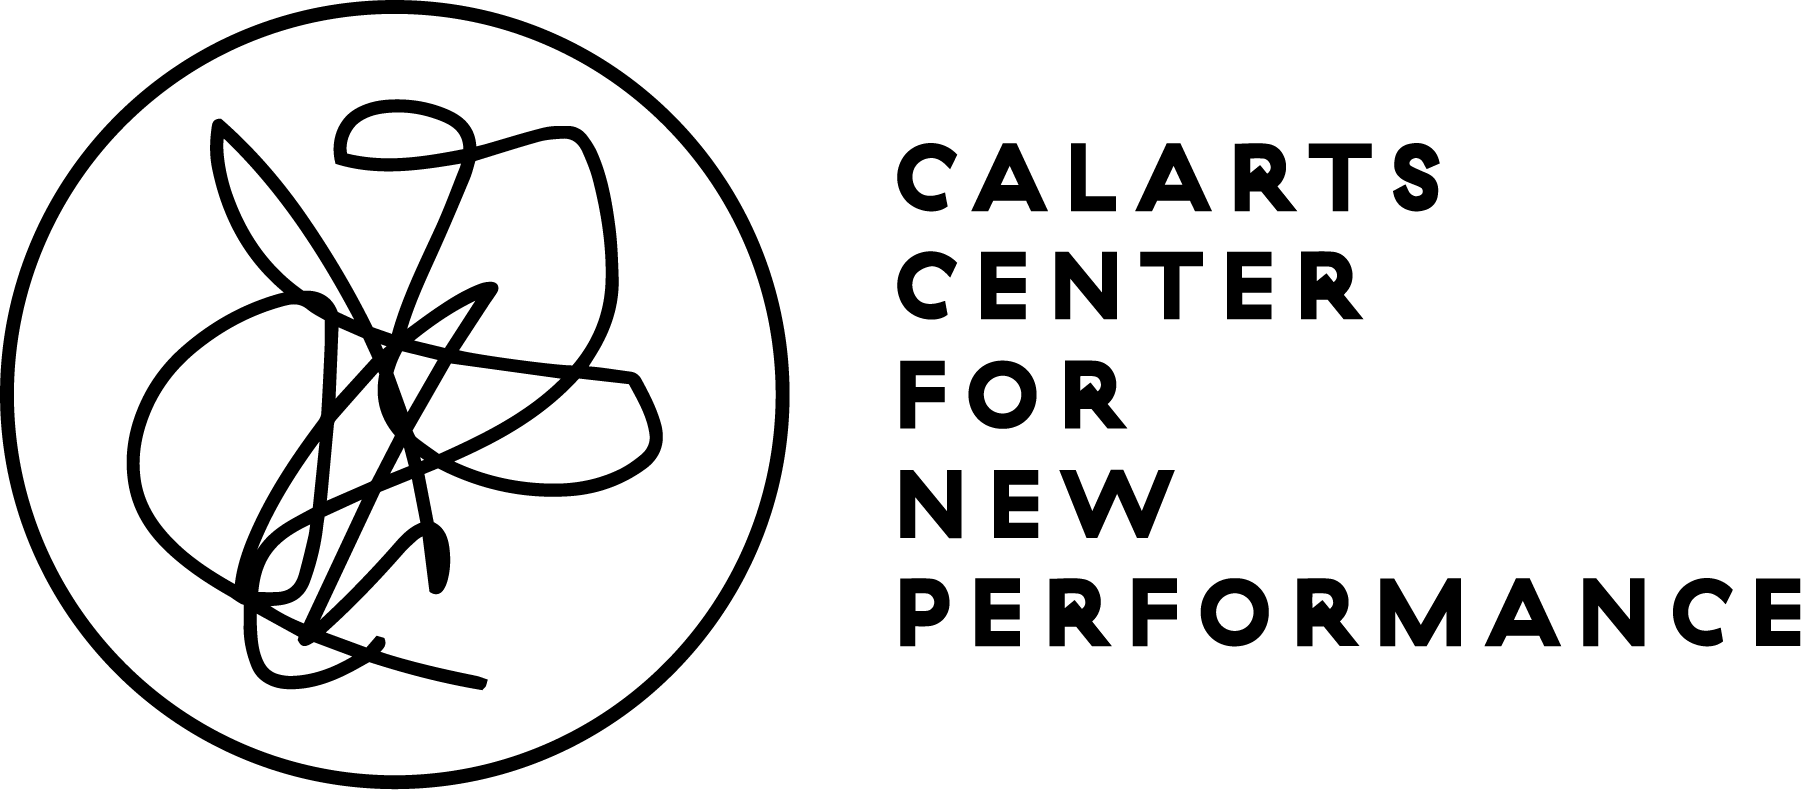 CalArts Center for New Performance